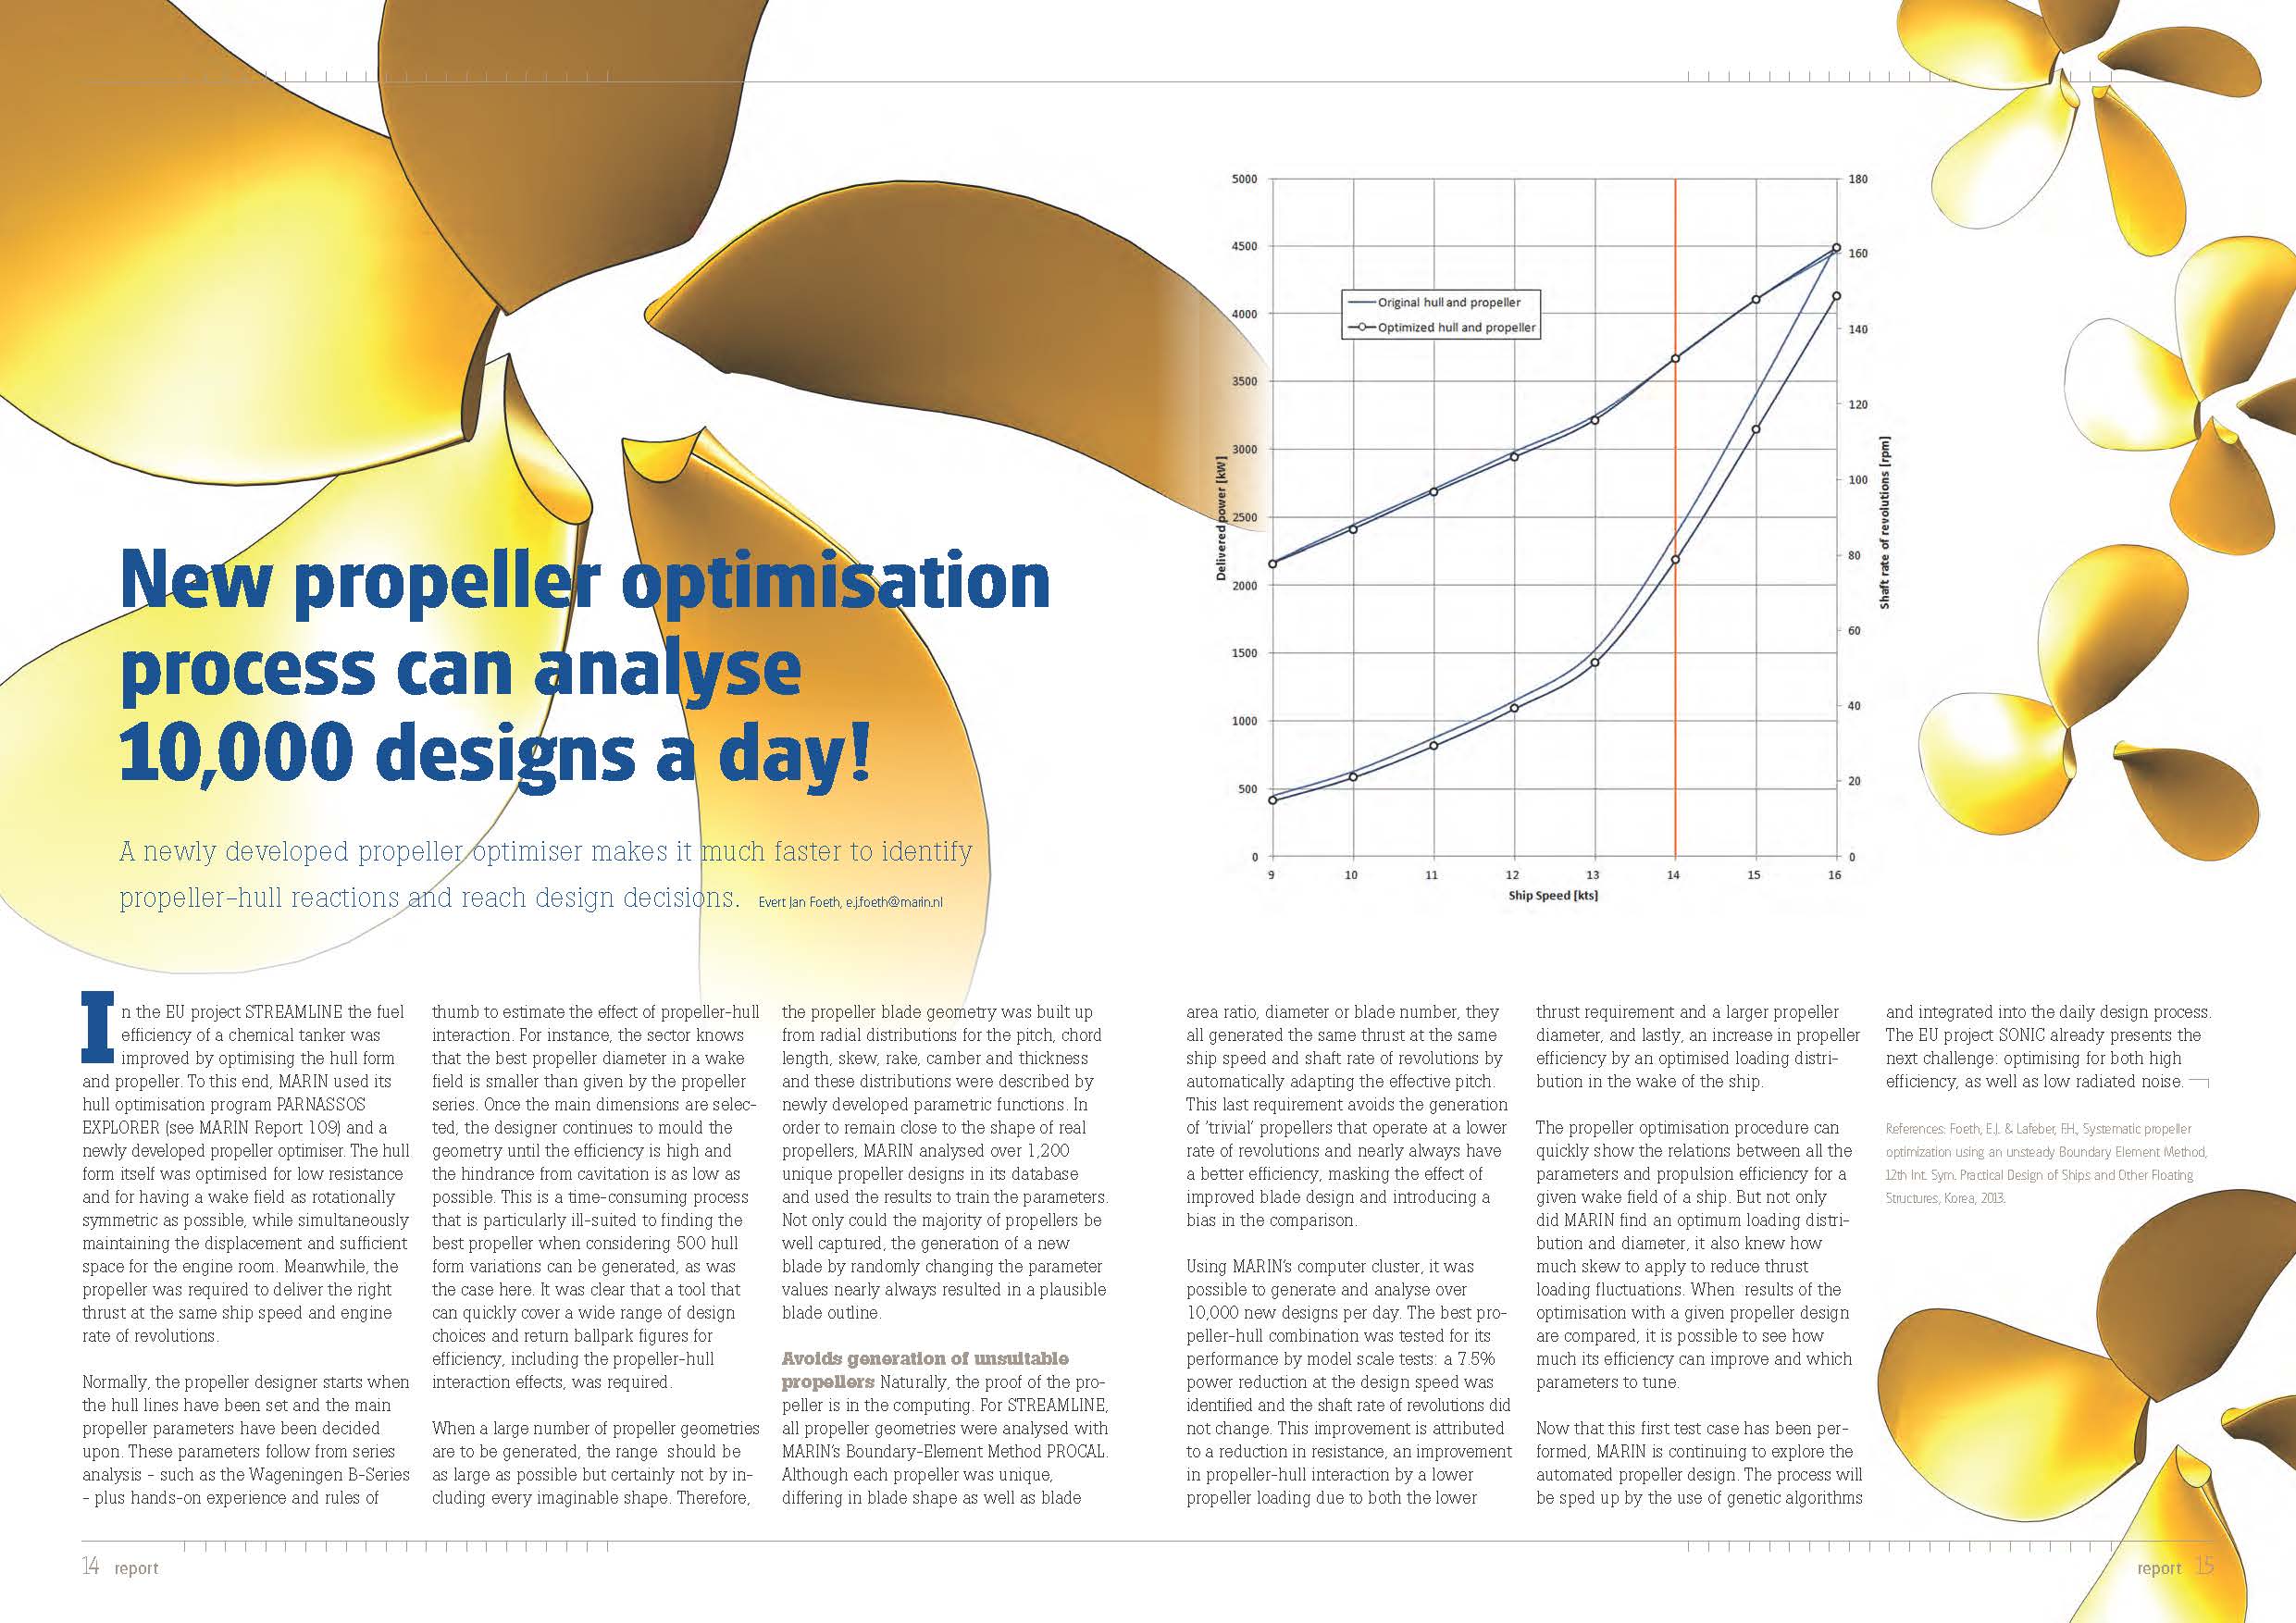 New propeller optimisation process can analyse 10,000 designs a day!